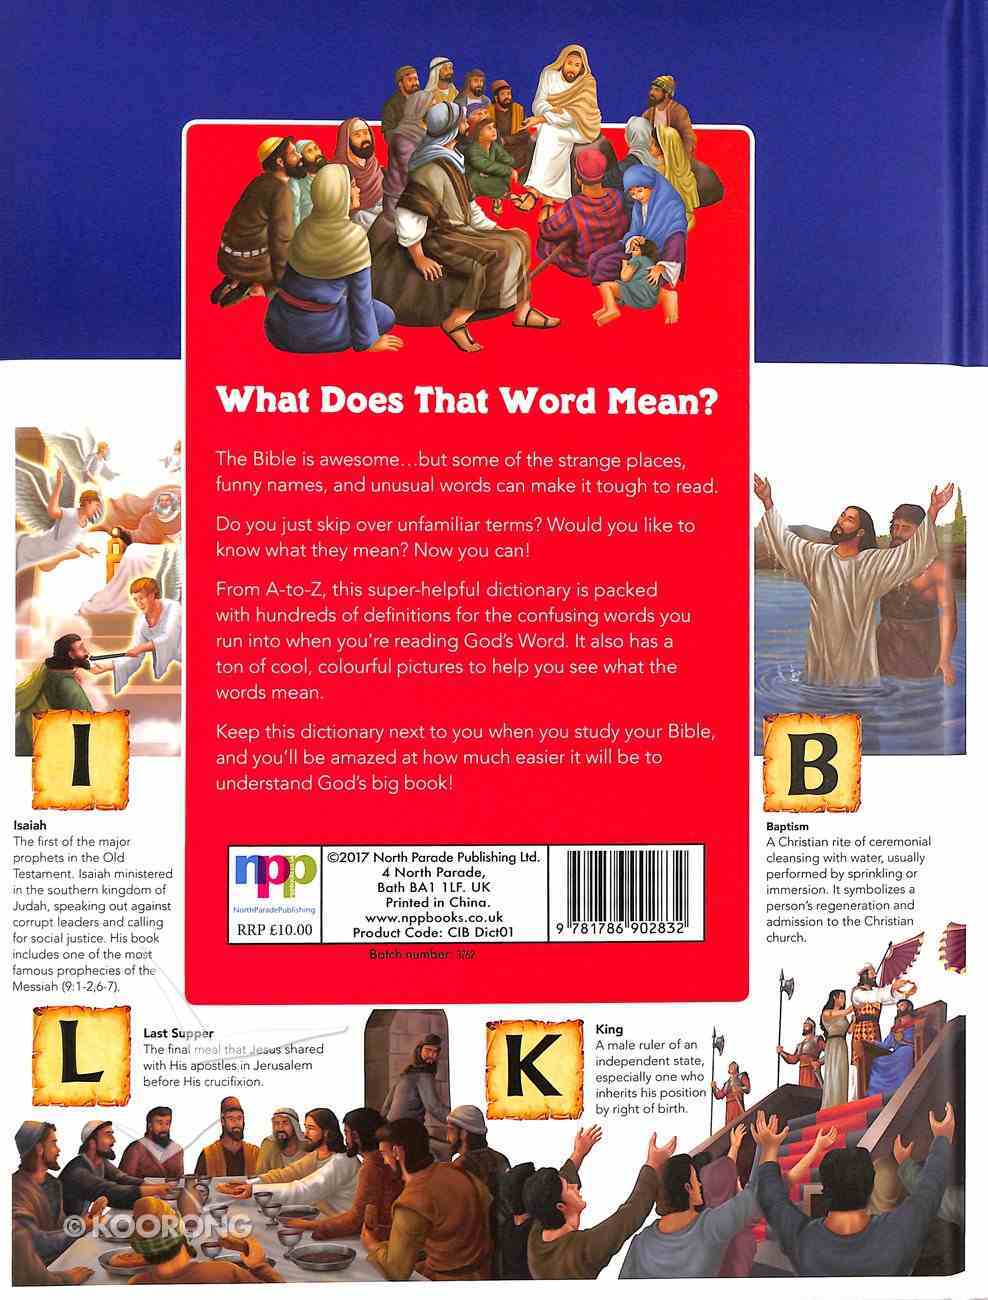 The Complete Illustrated Children's Bible Dictionary: Awesome A-To-Z Definitions to Help You Understand God's Word Padded Hardback